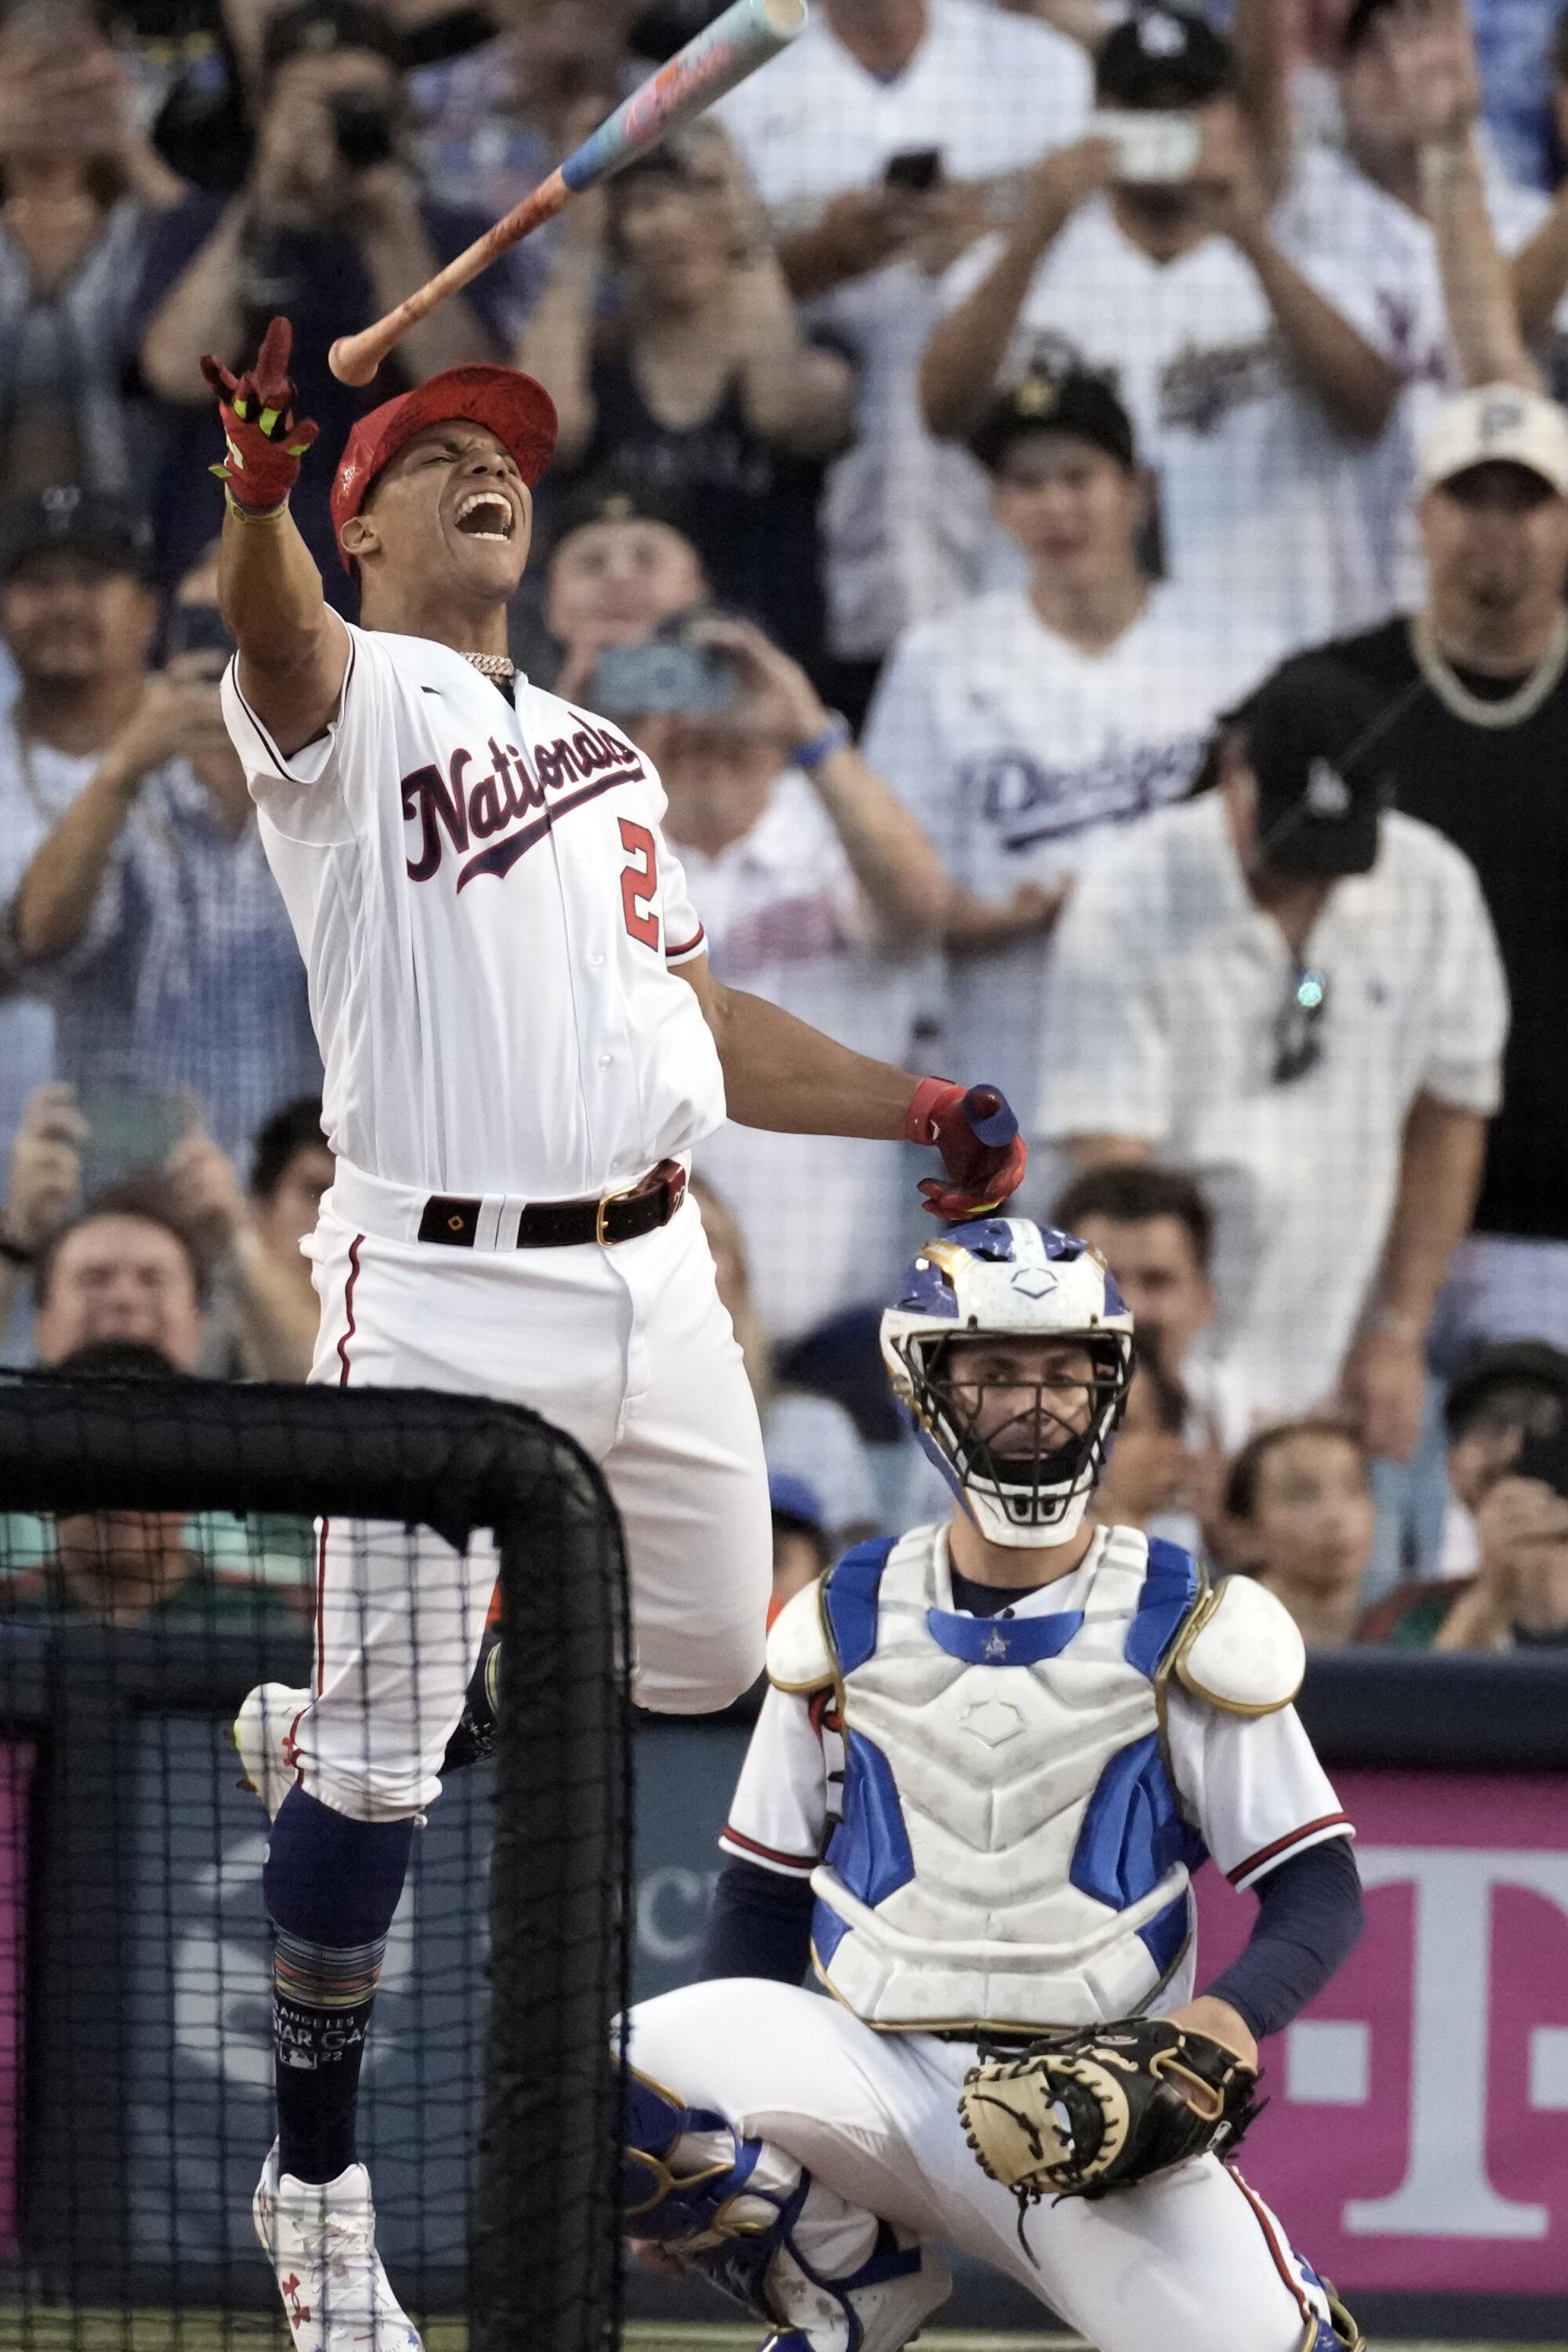 National League's Juan Soto celebrates after hitting a home run to win the MLB All-Star baseball Home Run Derby